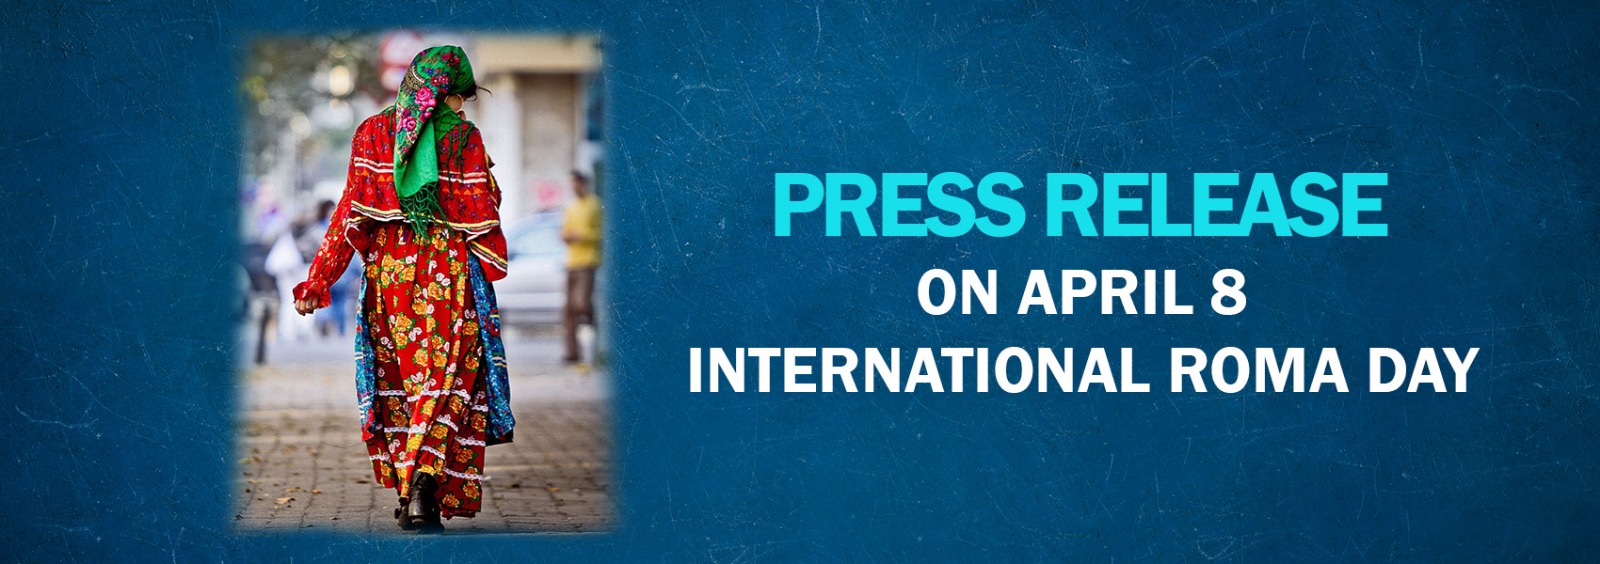 Press Release on April 8 International Roma Day